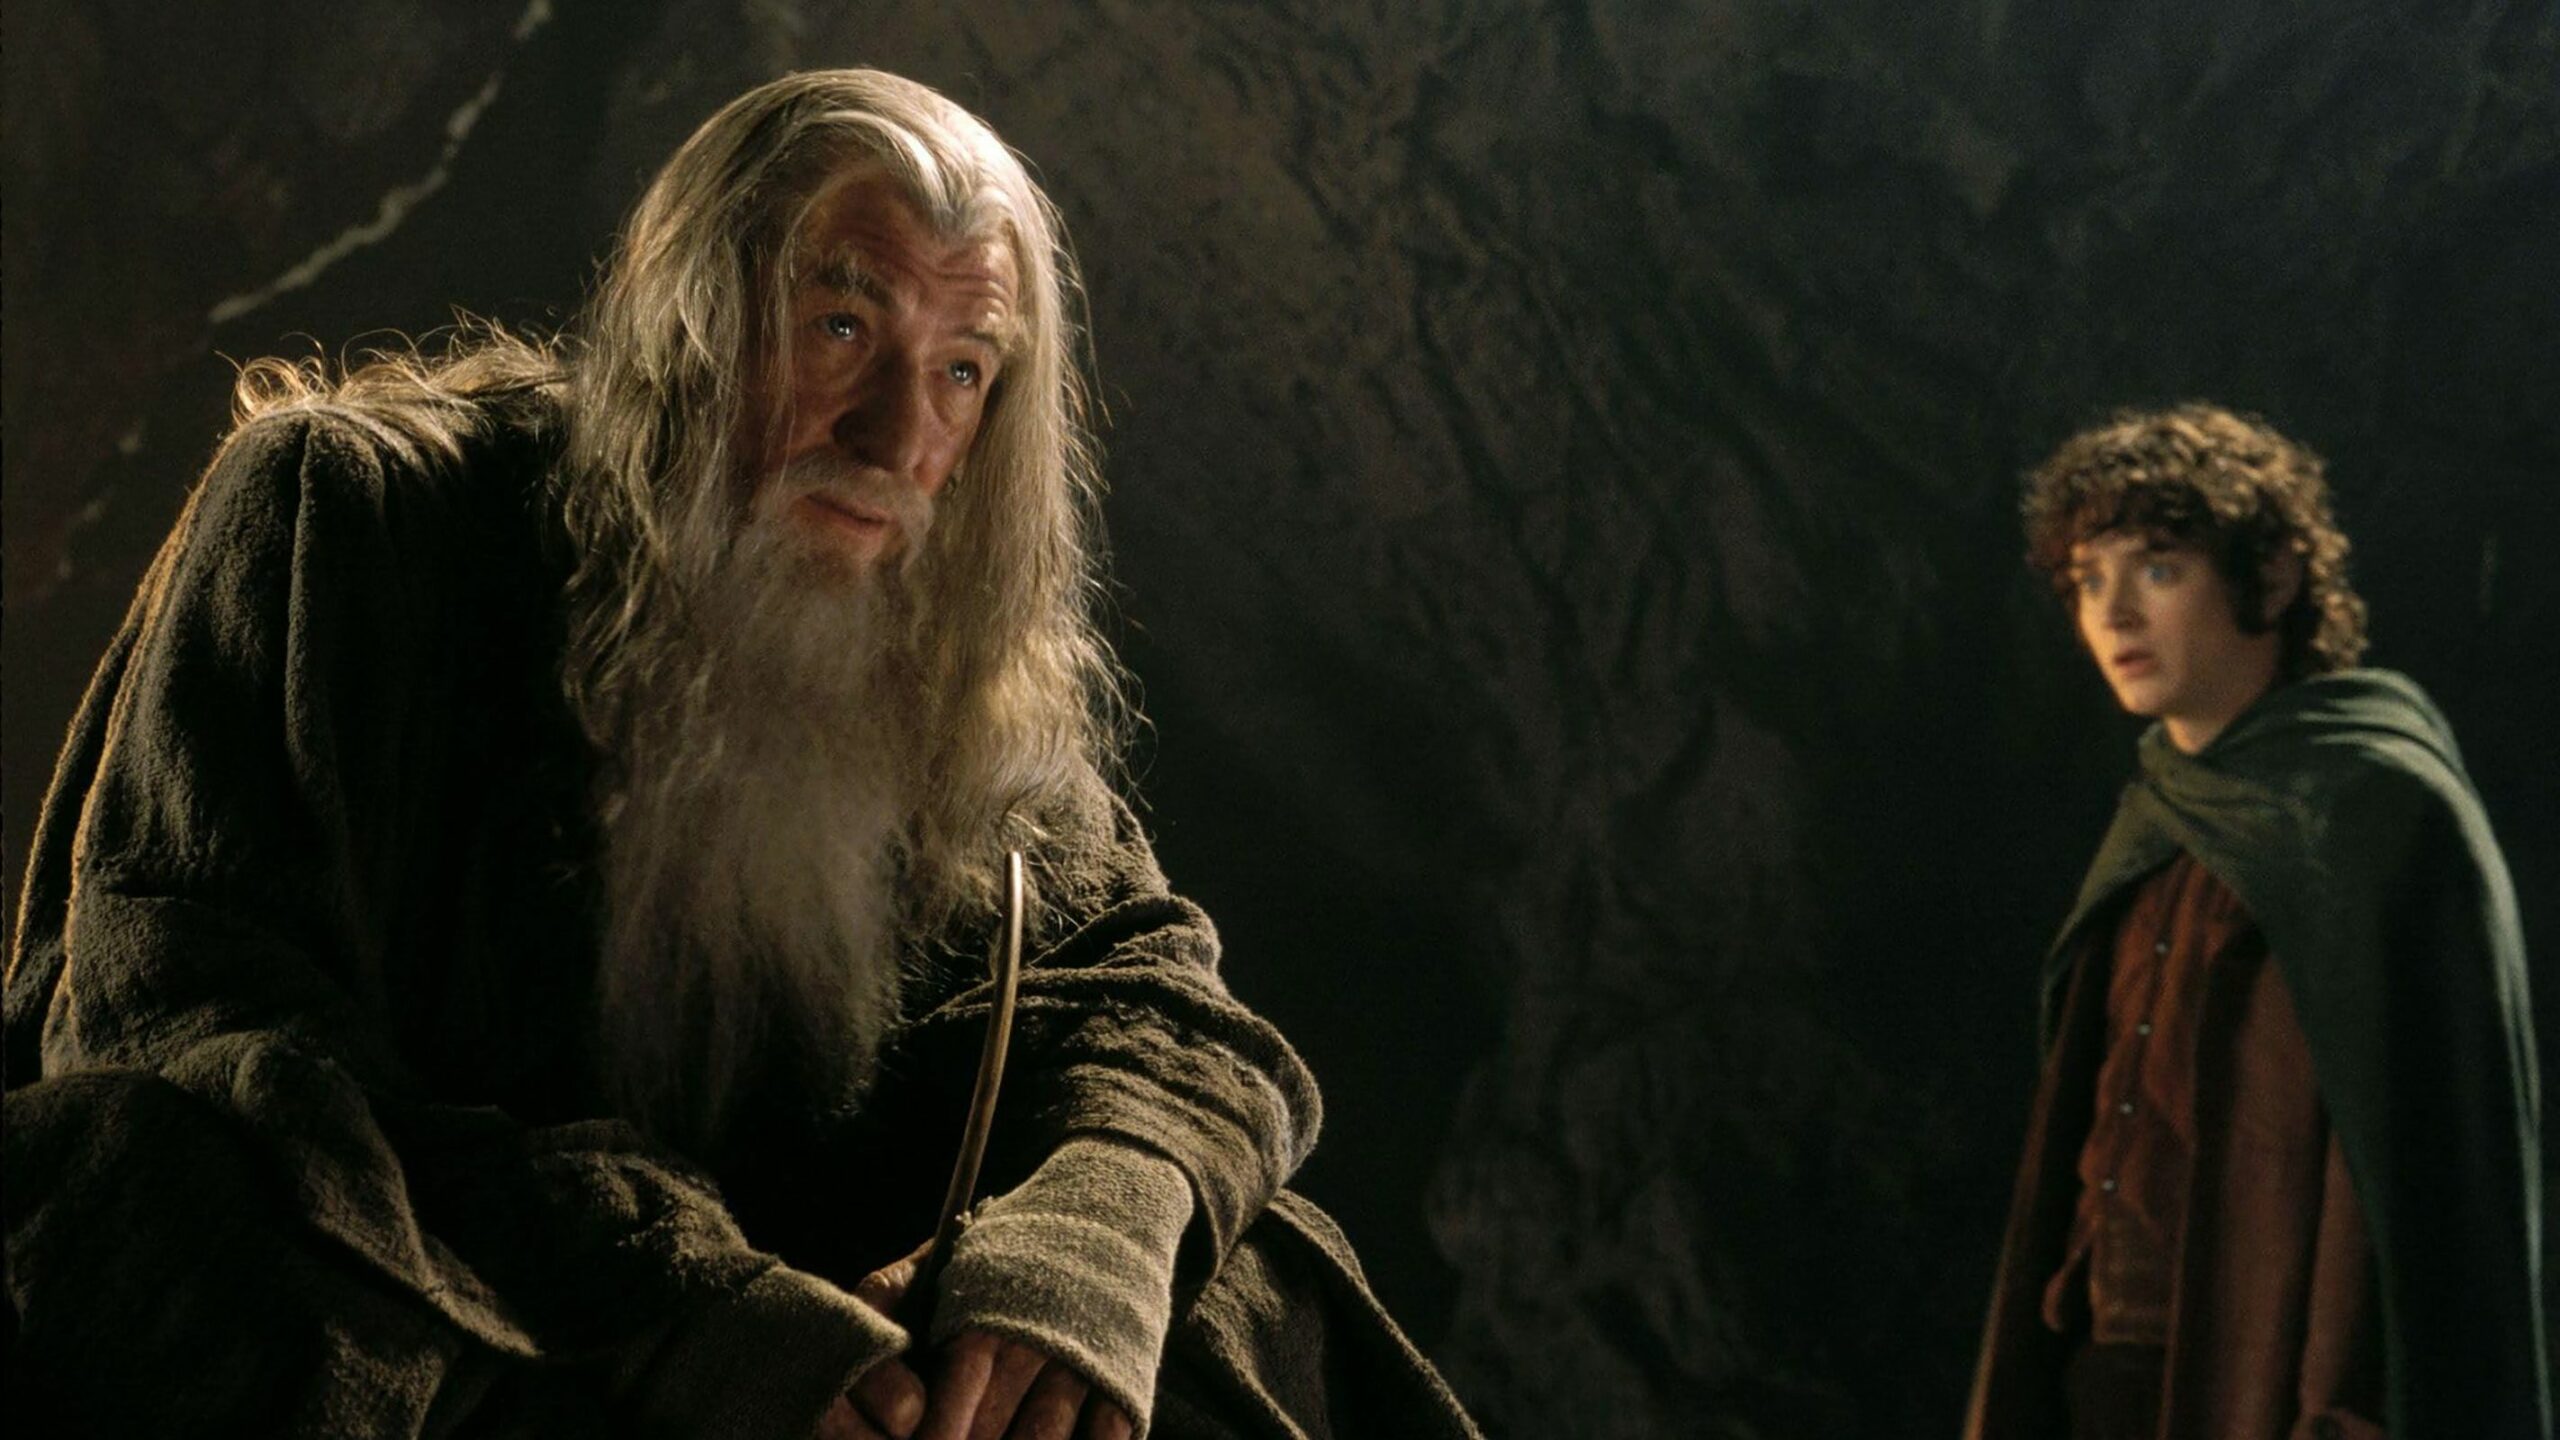 Ian McKellen Addresses Rumors of Returning as Gandalf in New Middle-earth Project